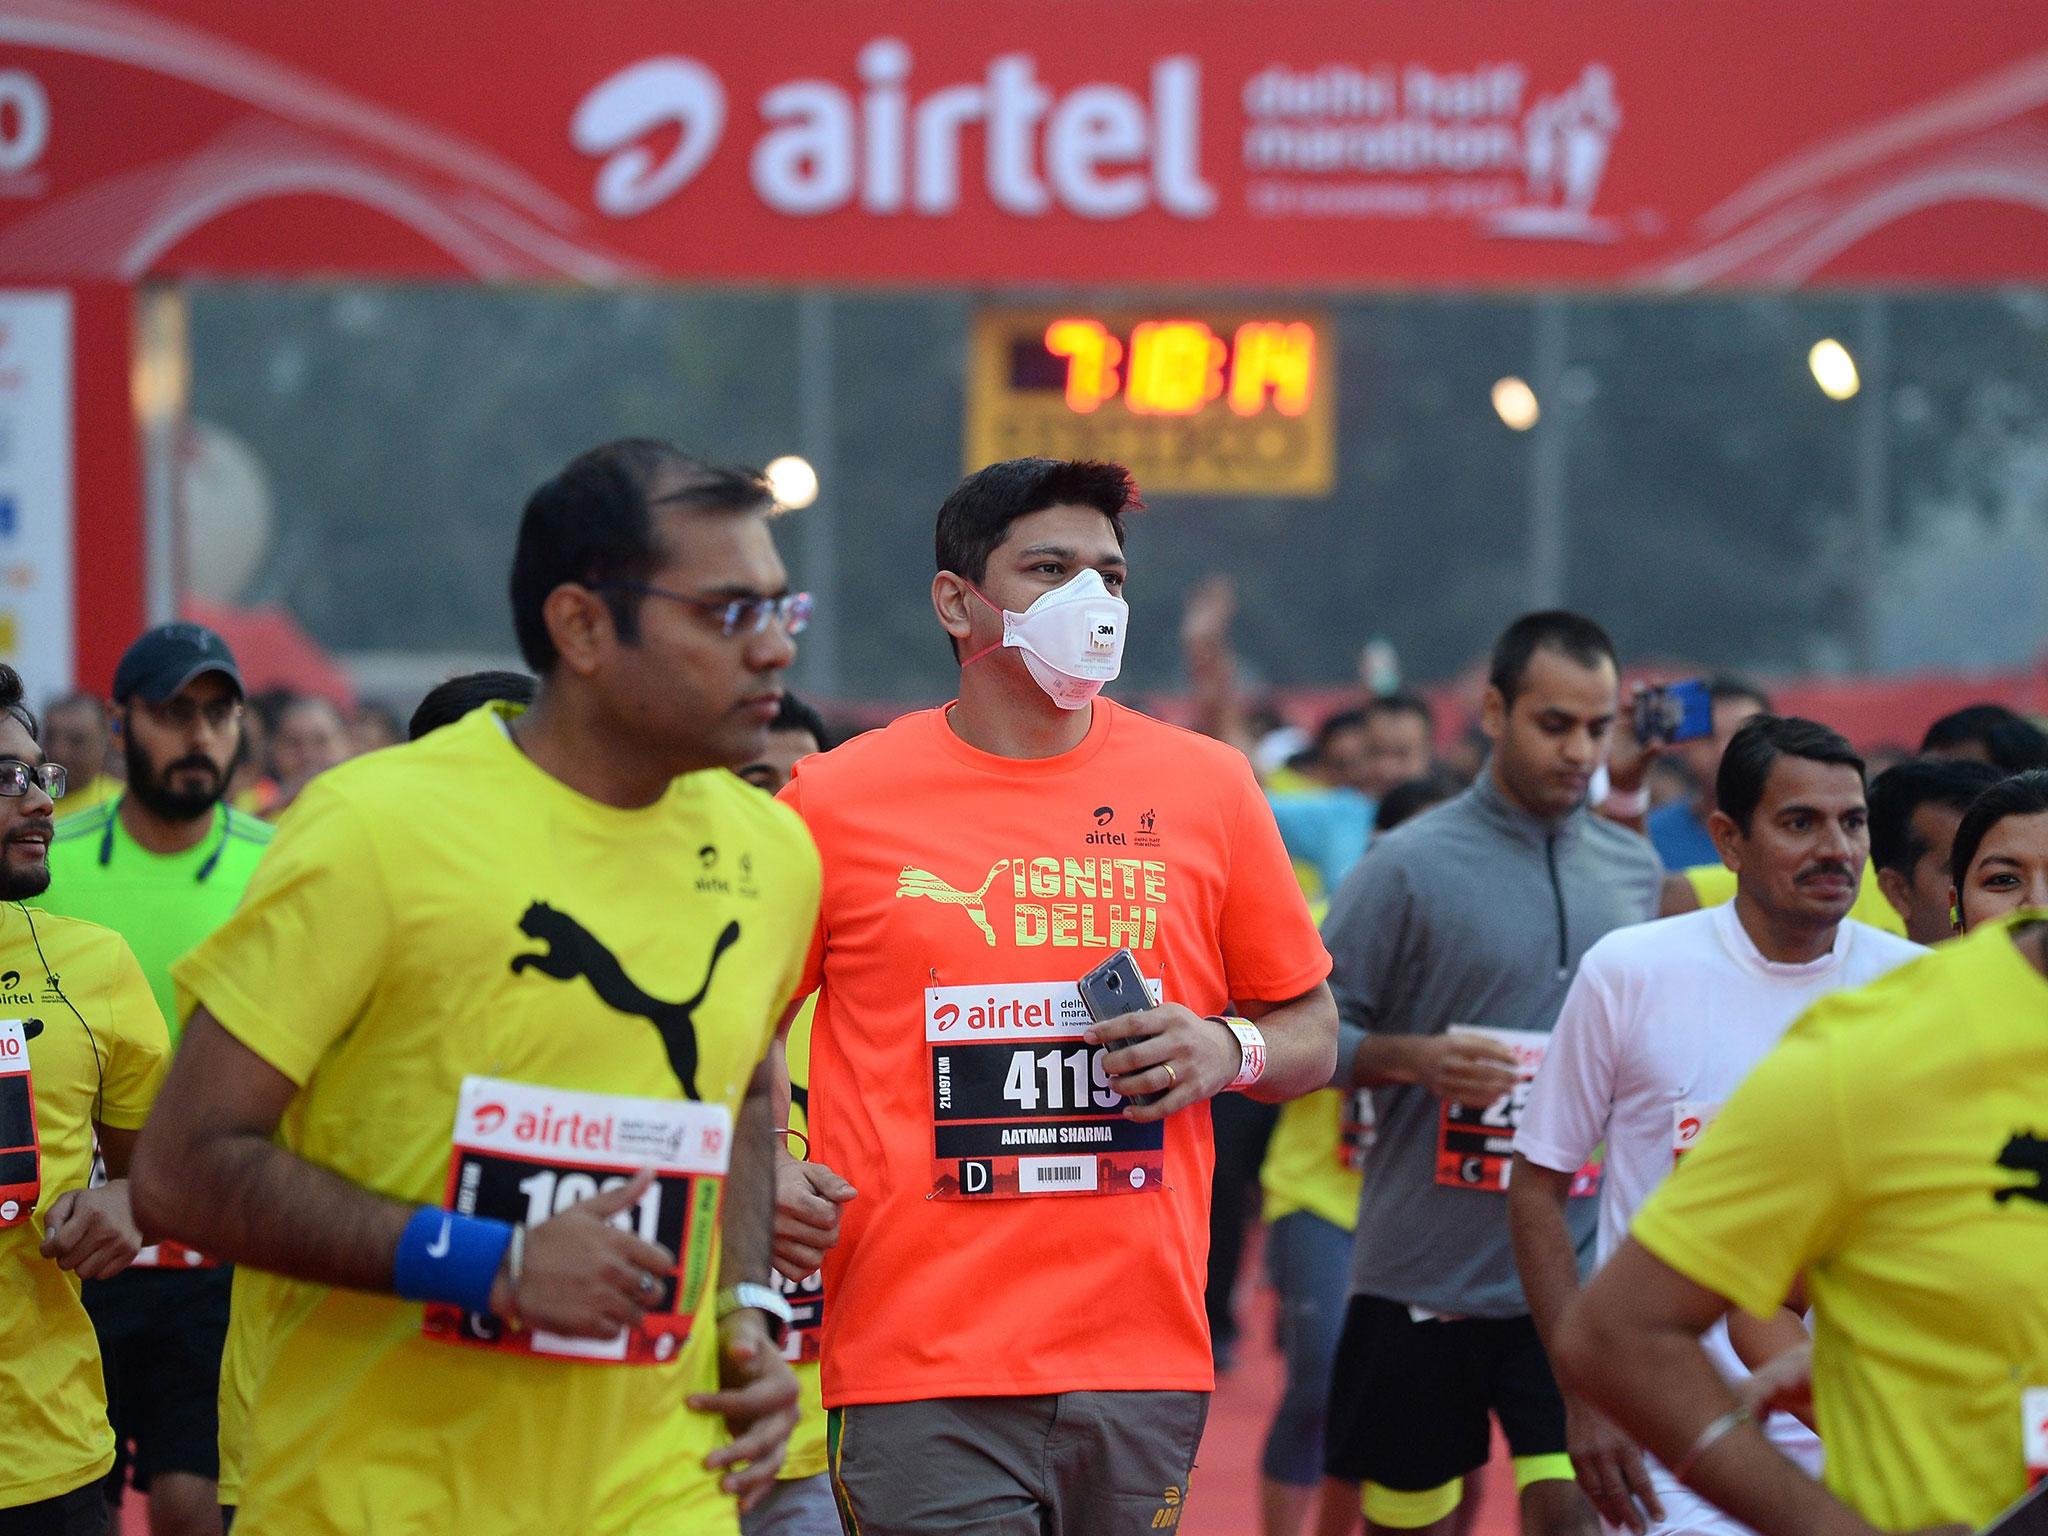 &#13;
Some runners chose not to wear face masks &#13;